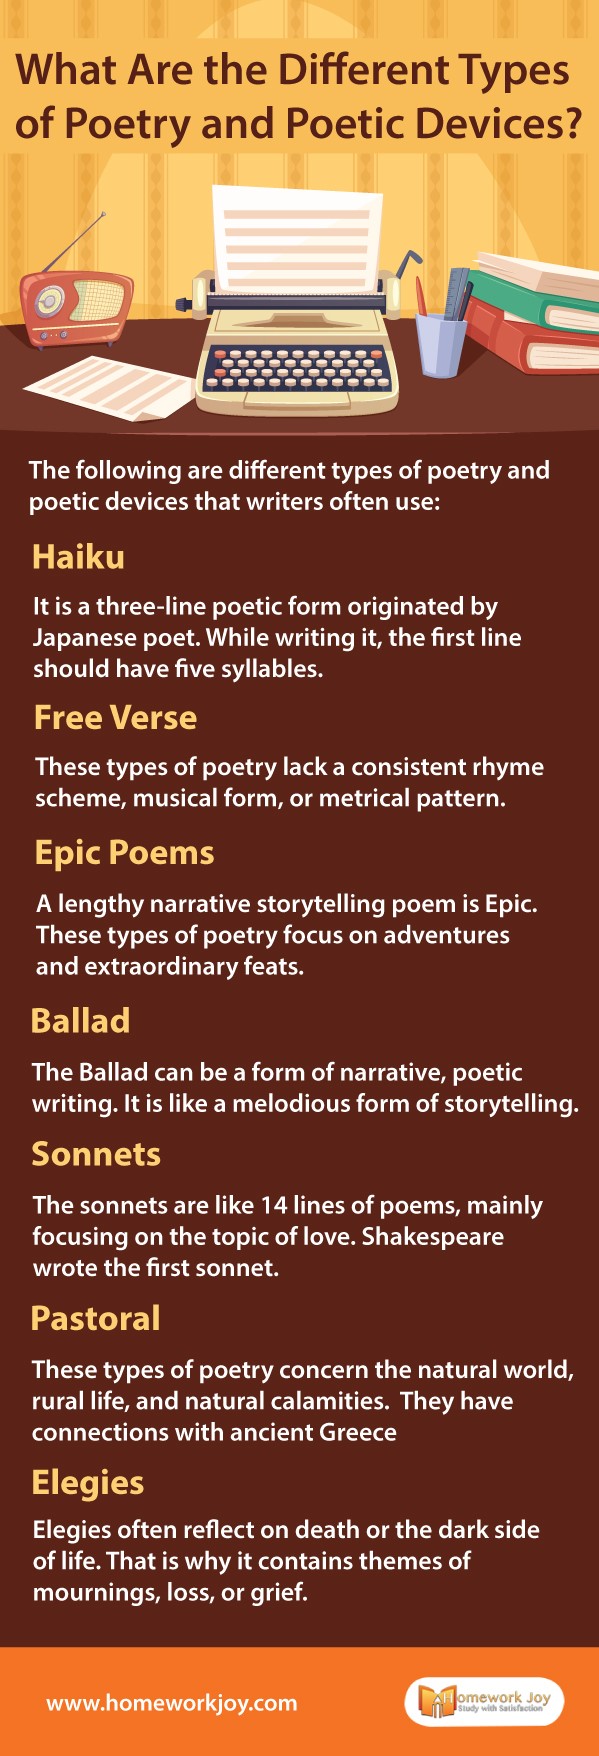 What Are the Different Types of Poetry and Poetic Devices